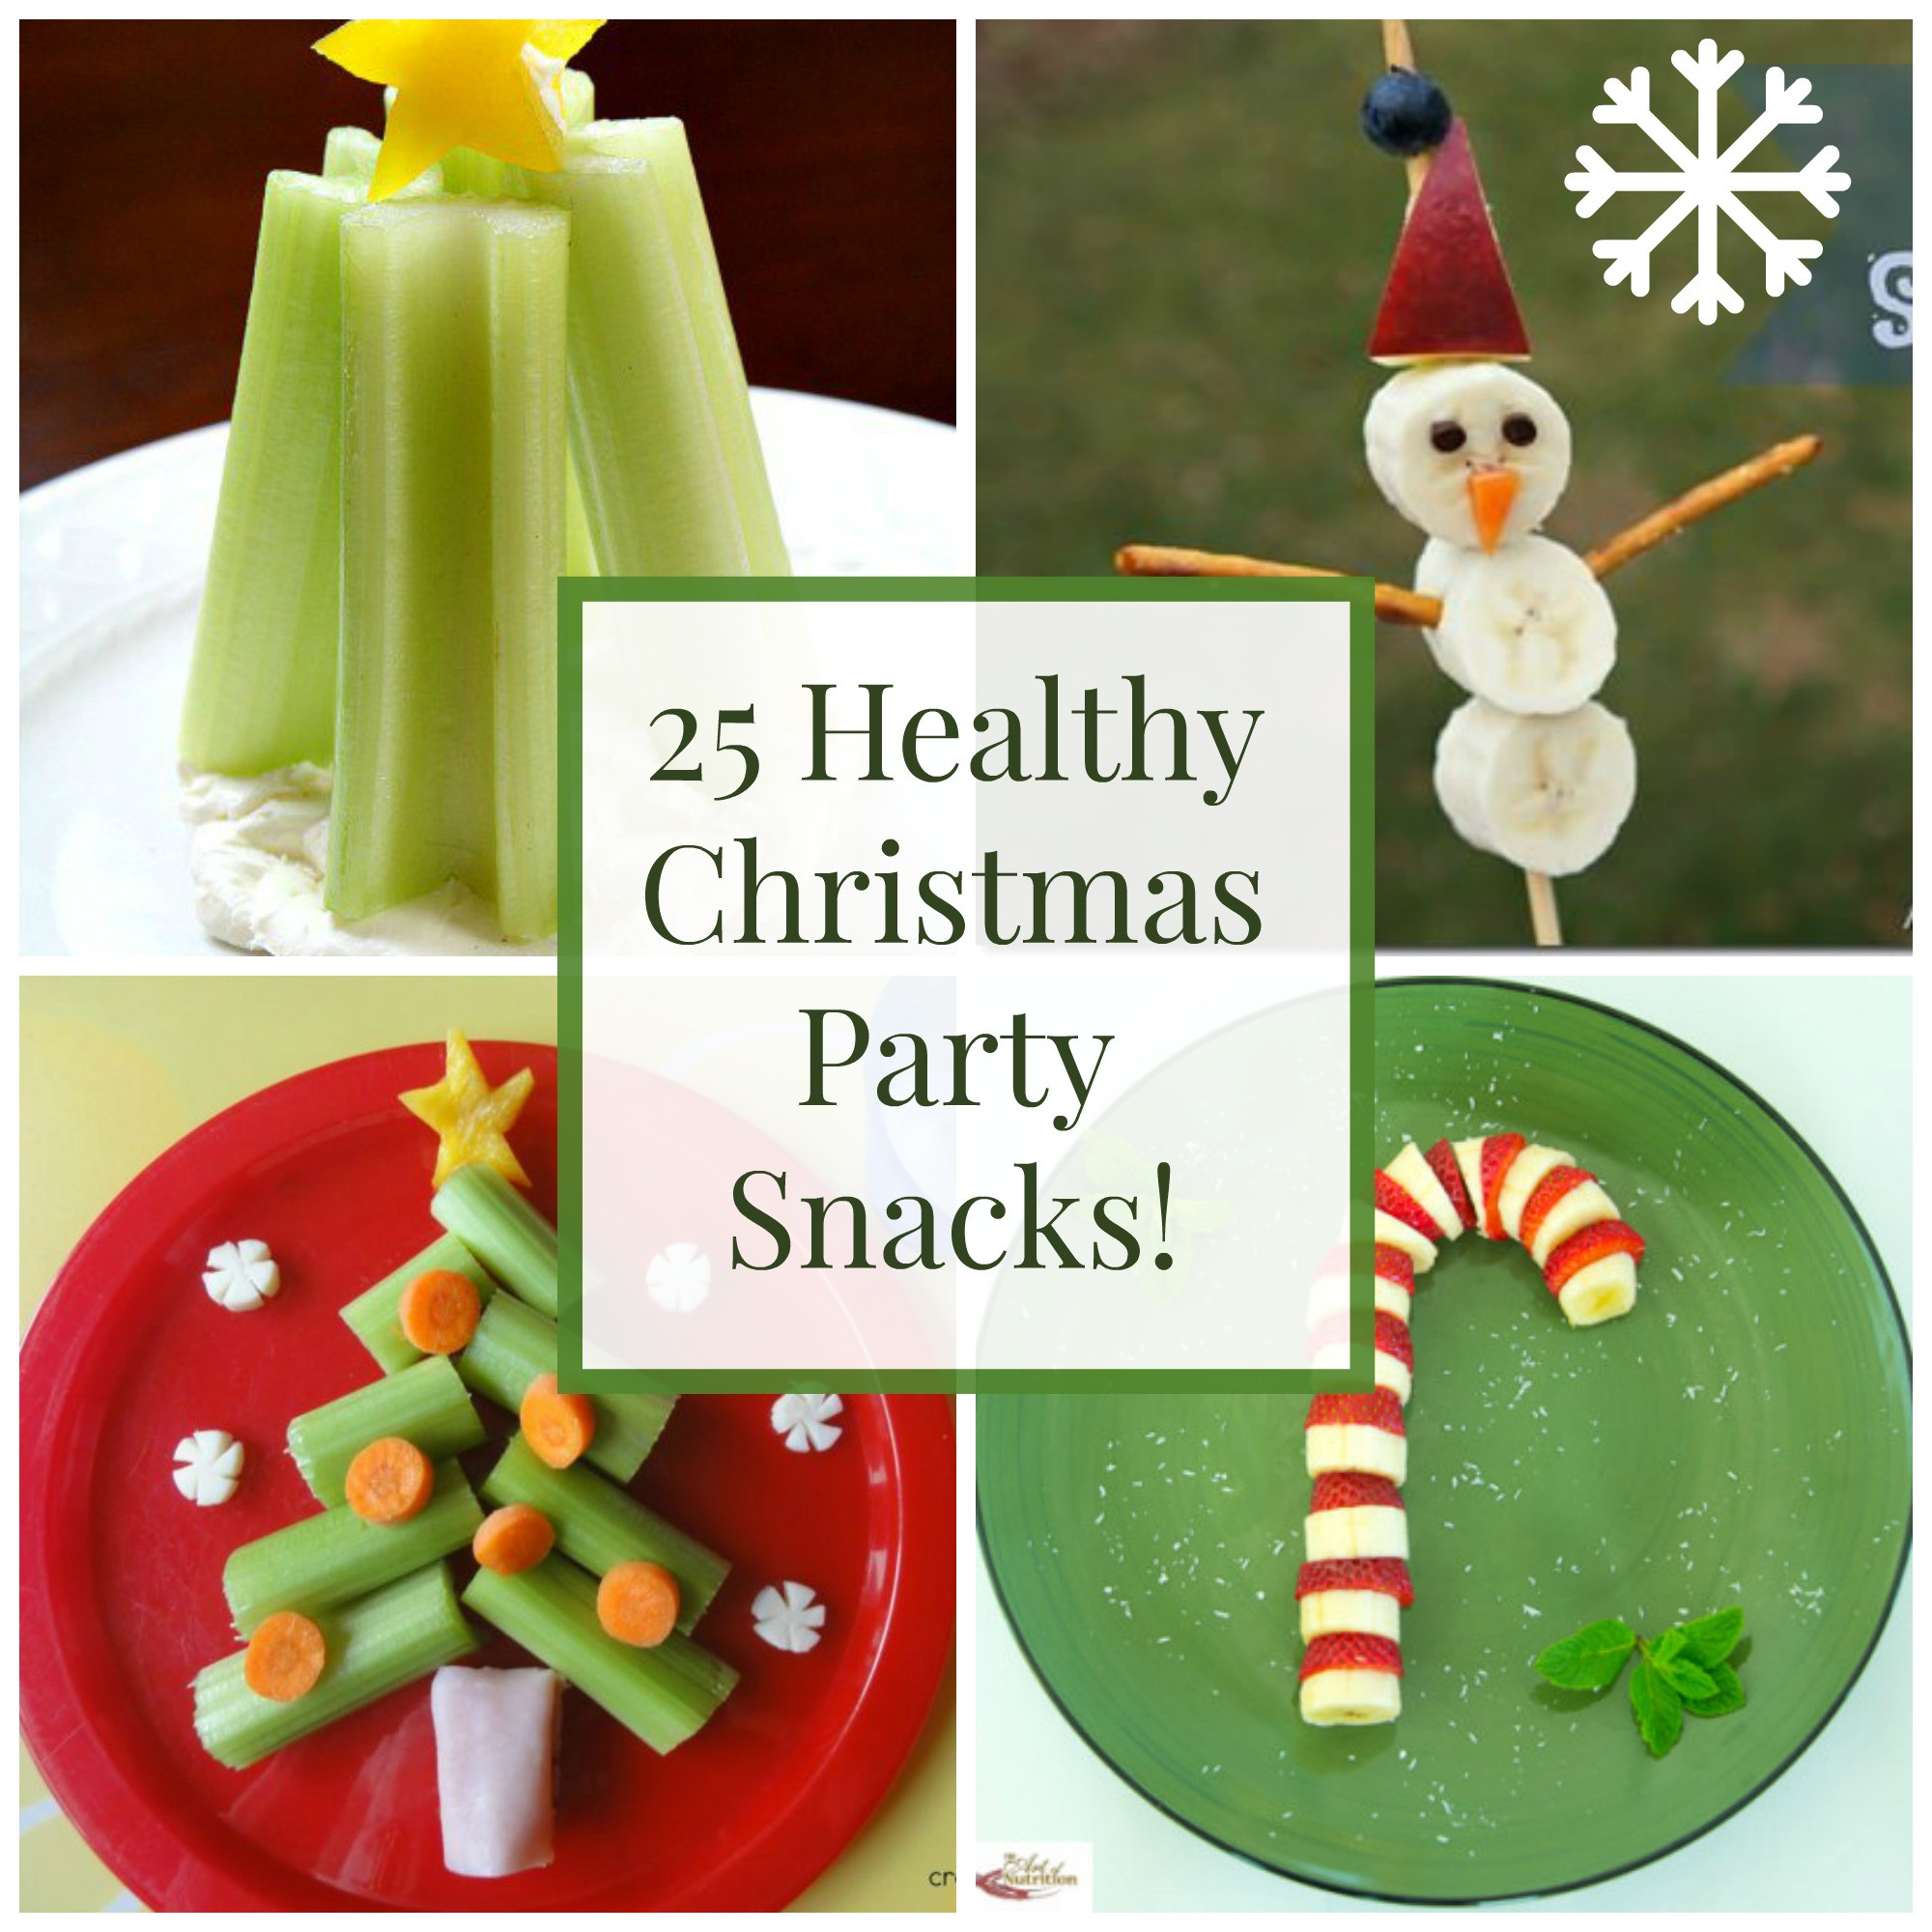 Healthy Christmas Party Snacks
 25 Healthy Christmas Snacks and Party Foods